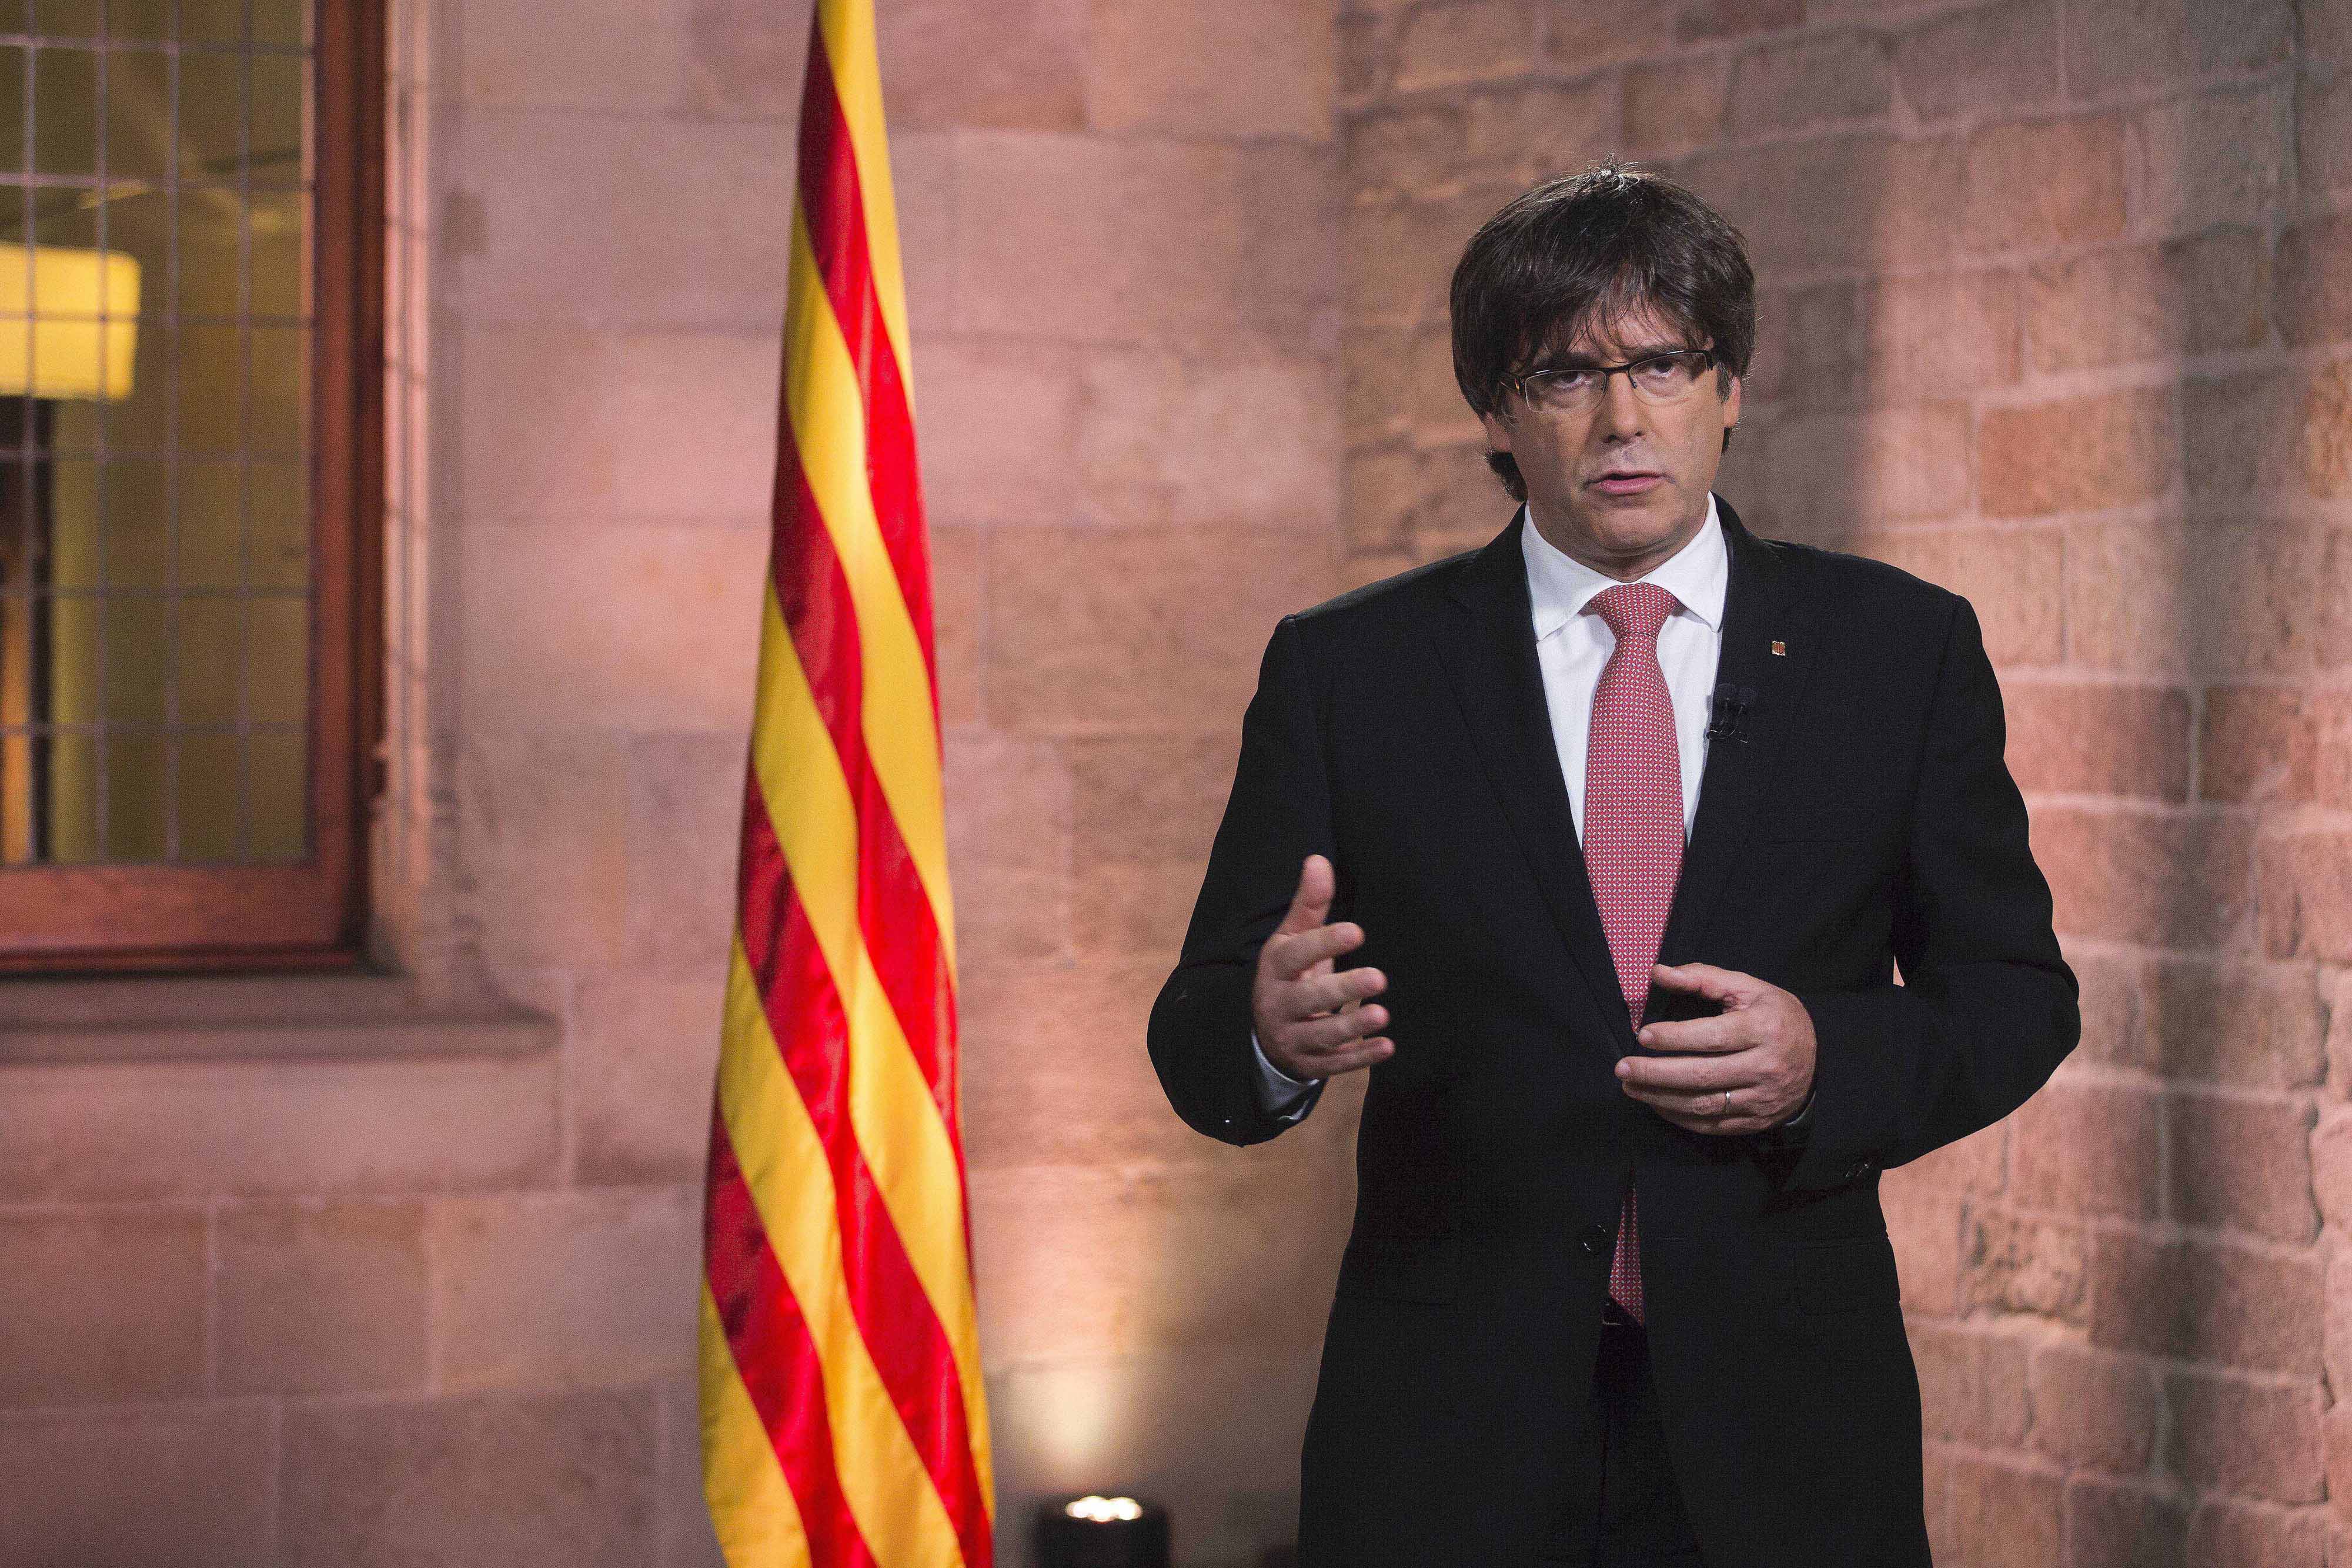 Puigdemont during his statement